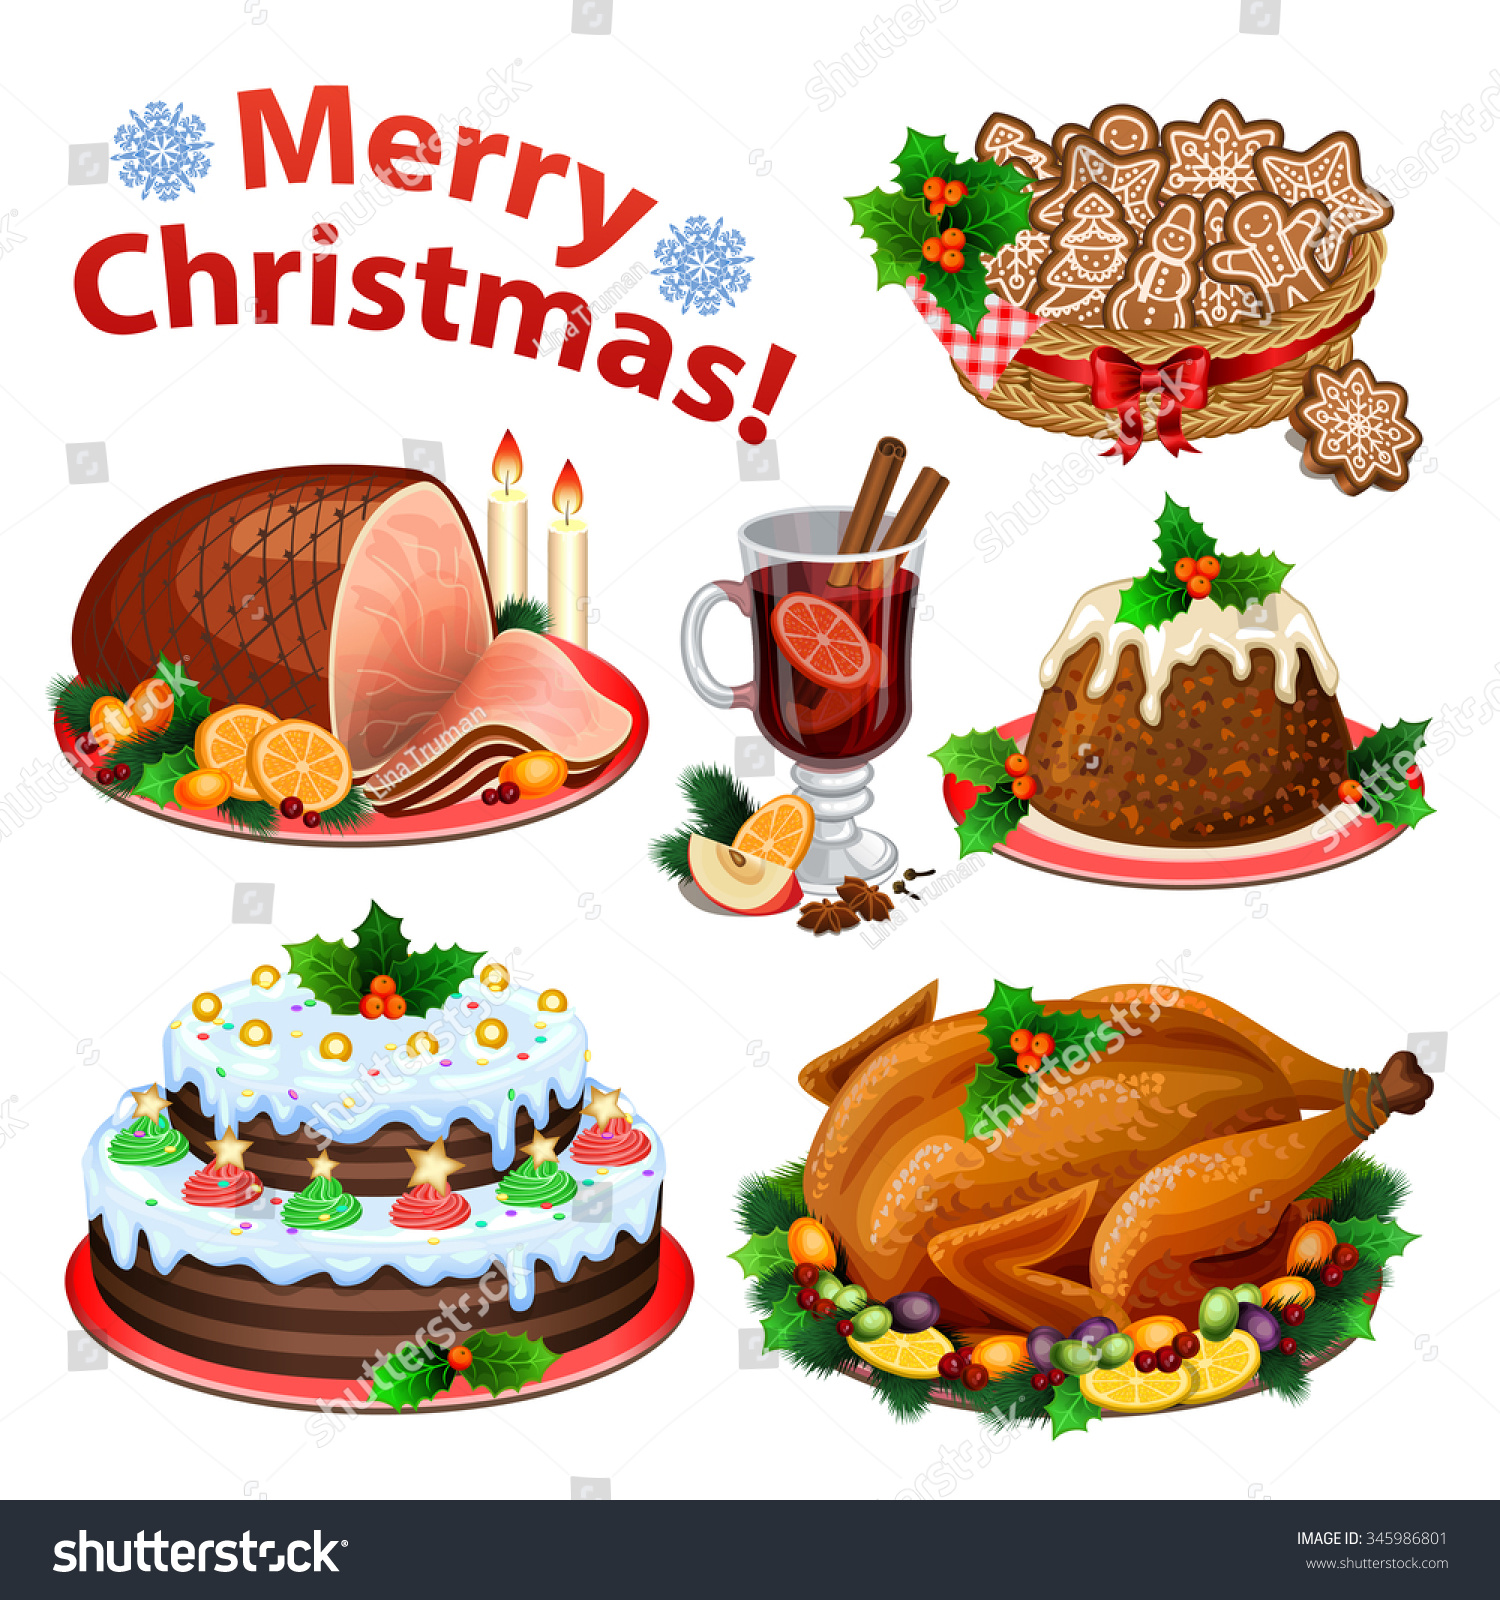 christmas meal clipart - photo #44